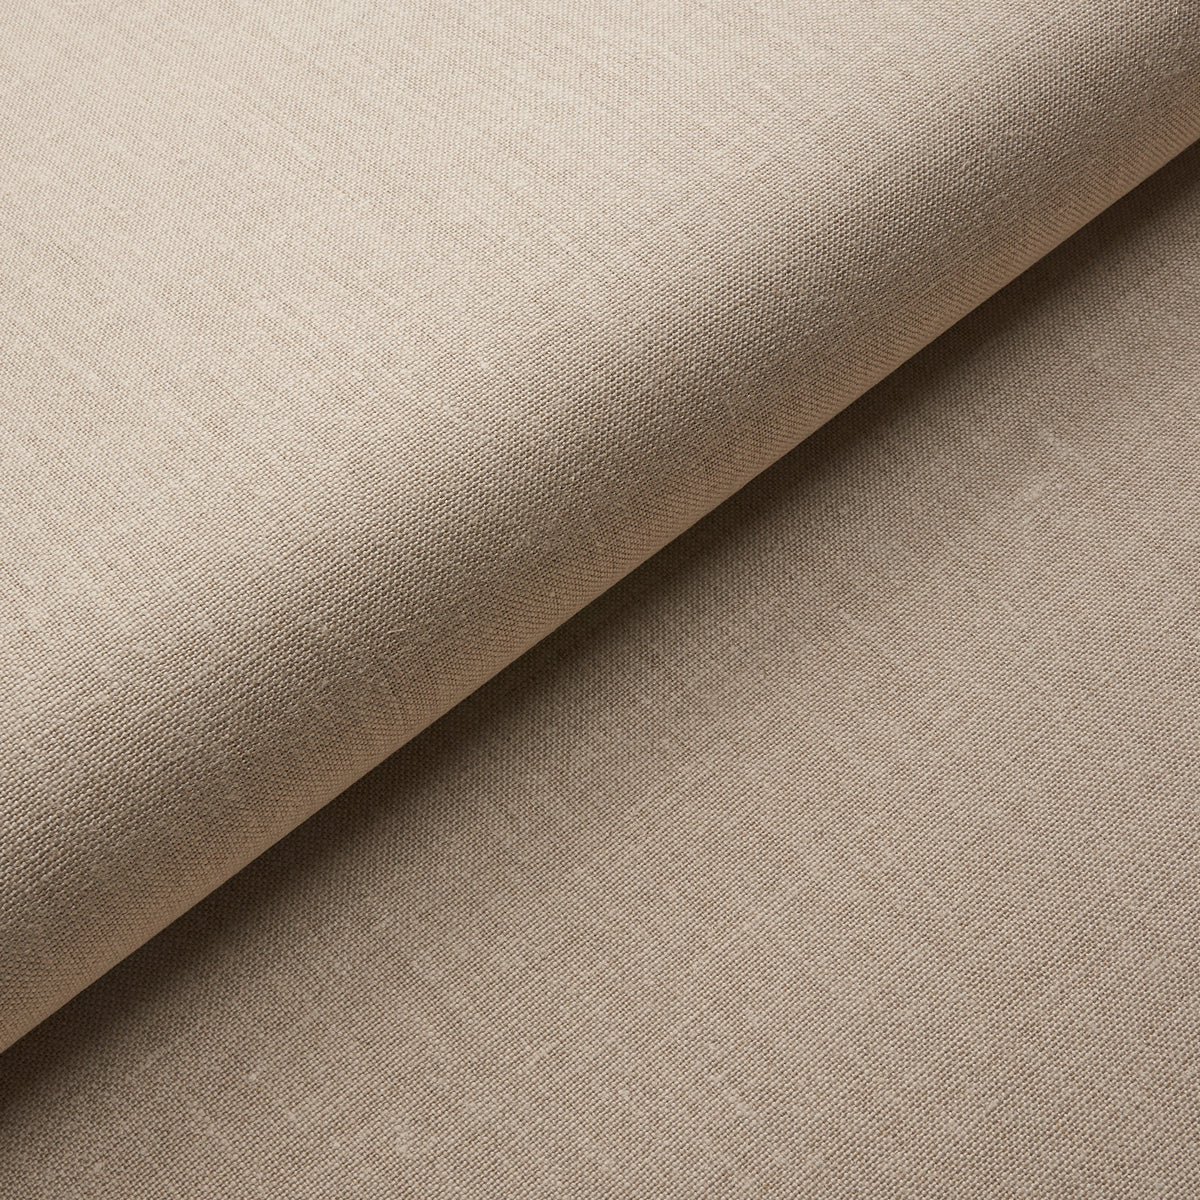 PERFORMANCE LINEN WALLCOVERING | FLAX